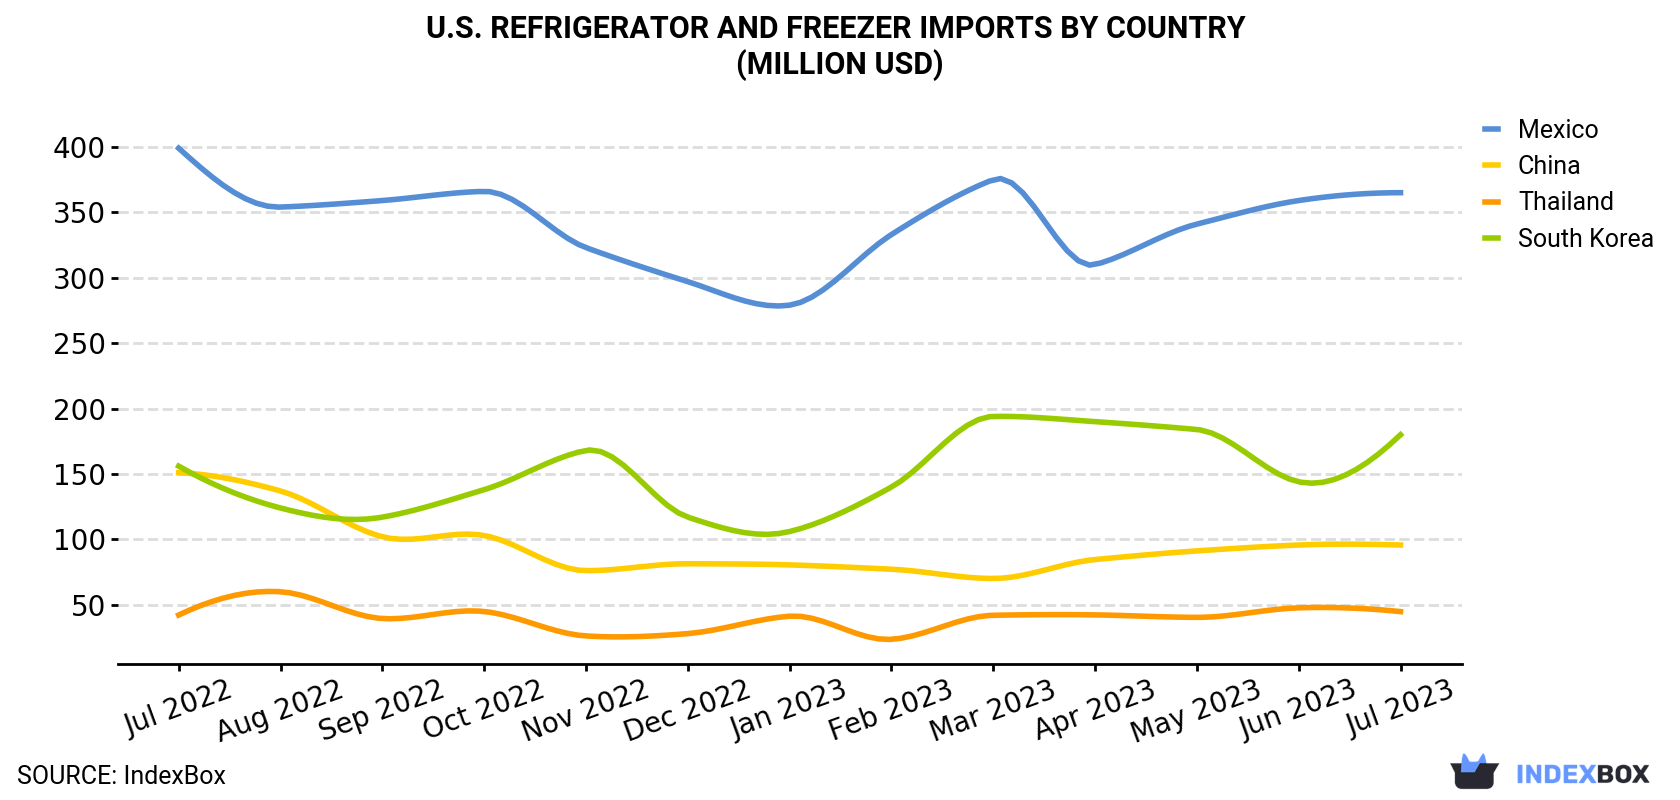 U.S. Refrigerator and Freezer Imports By Country (Million USD)